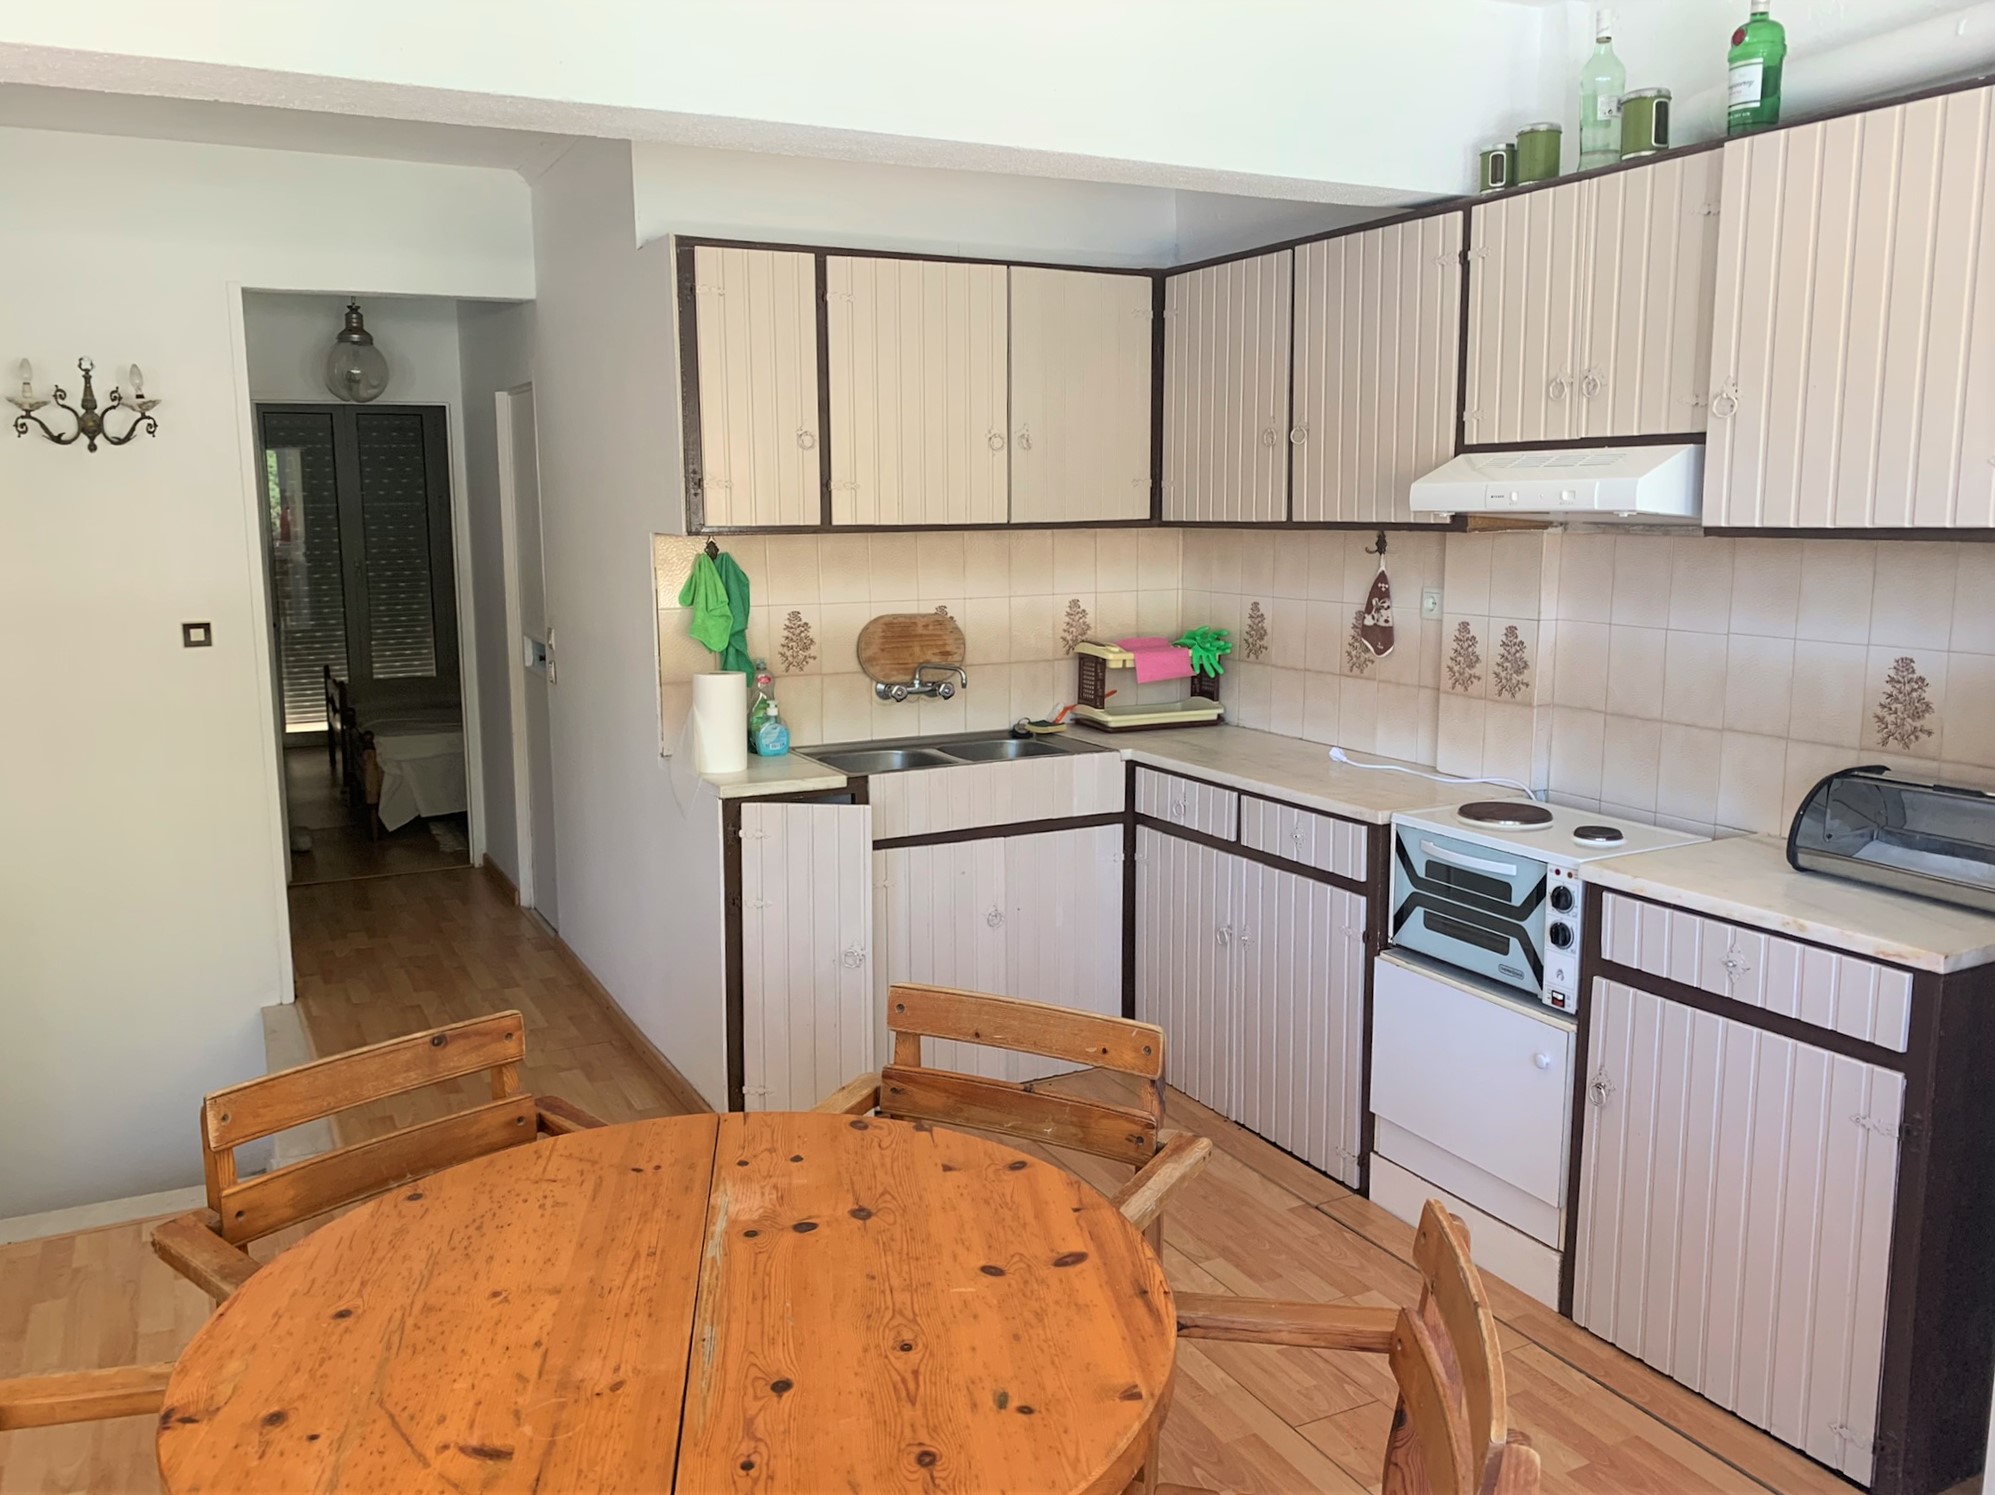 Kitchen area of house for sale in Ithaca Greece, Frikes